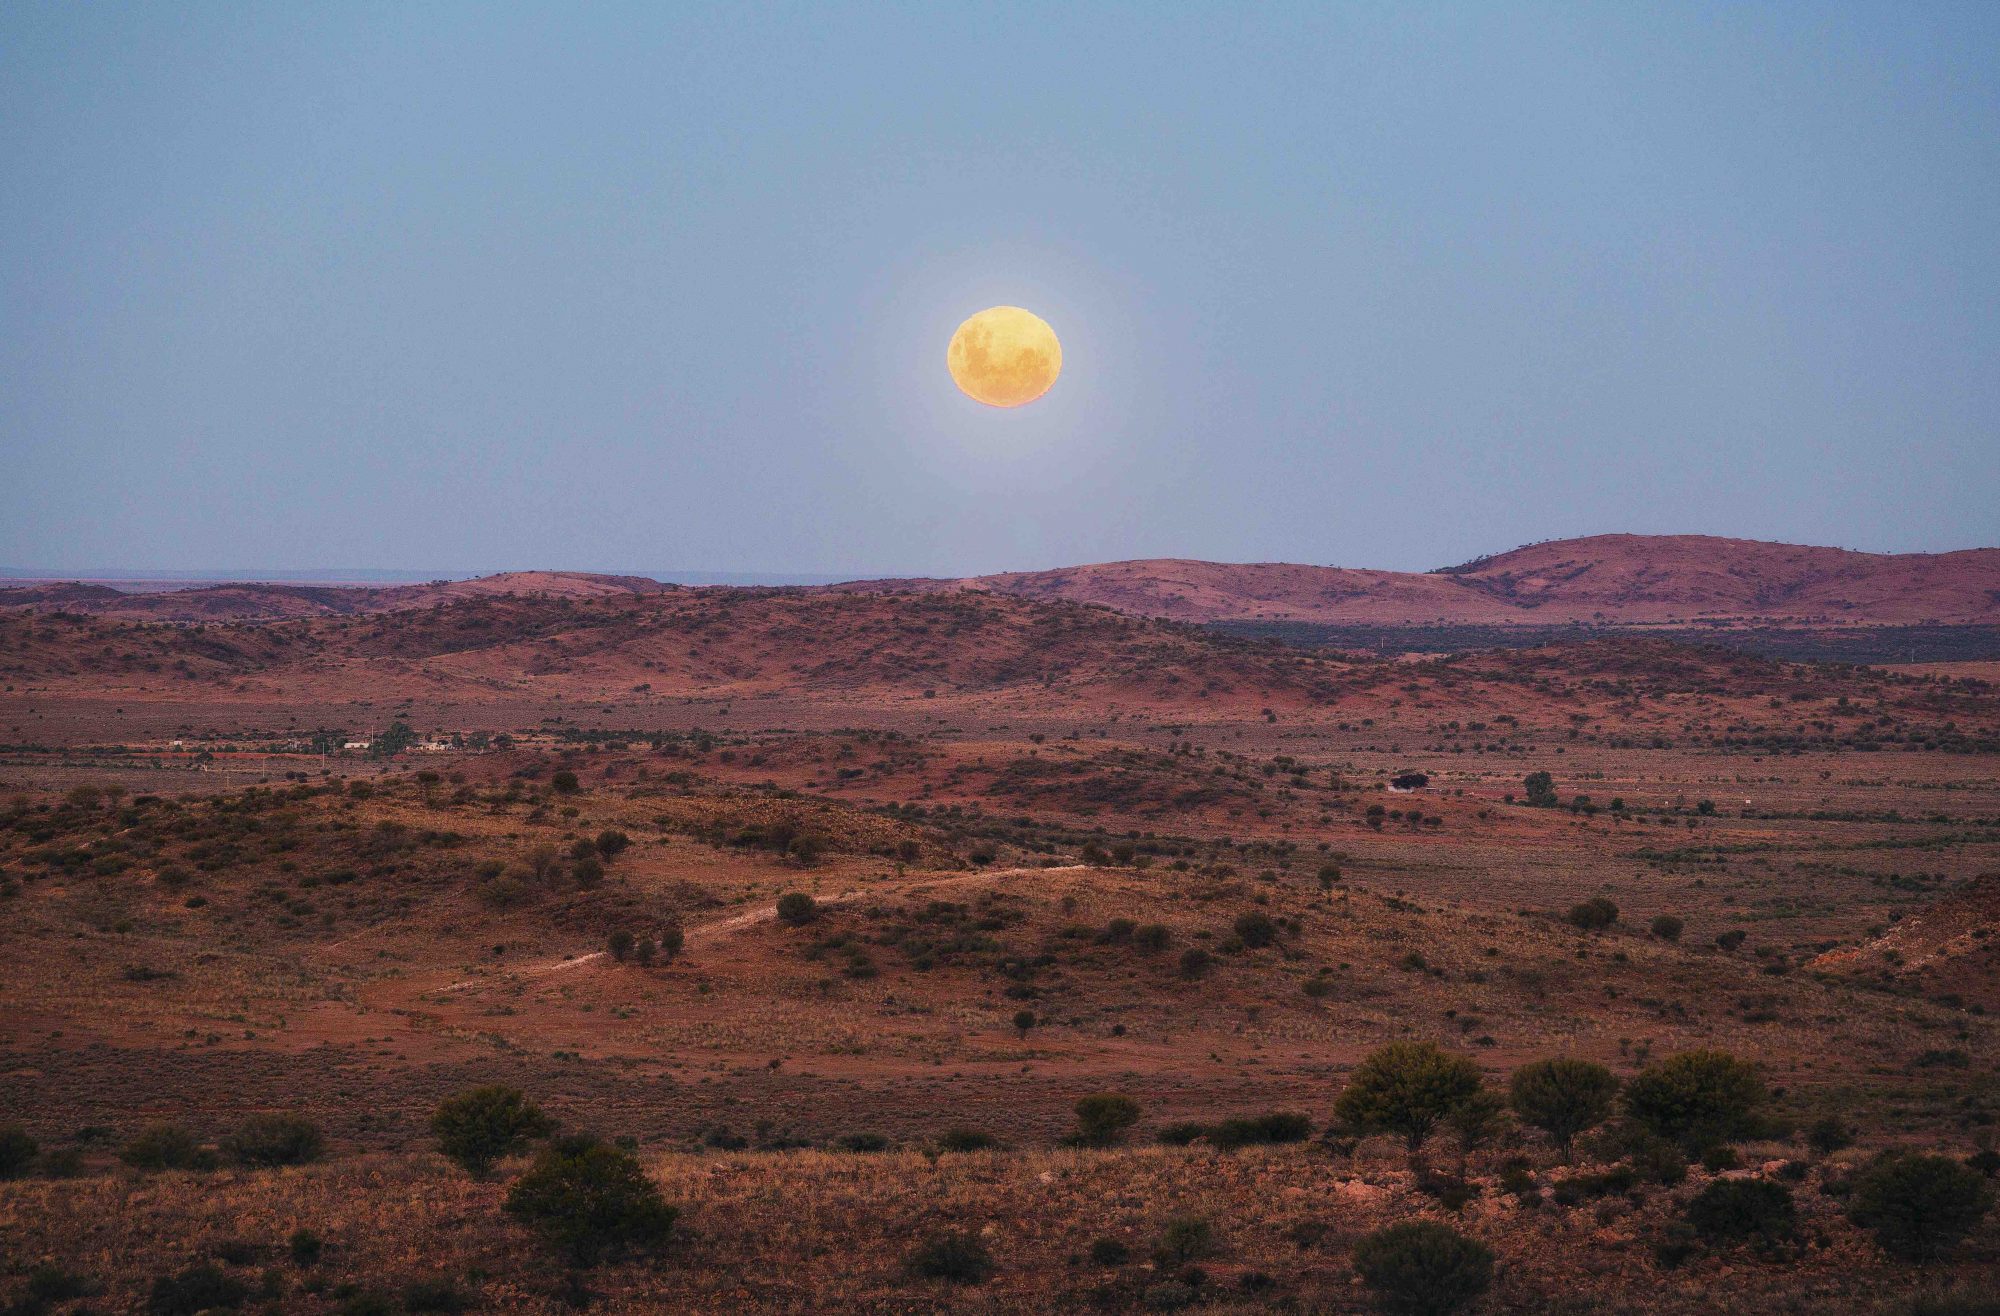 Moon rising over the outback near Broken Hill.